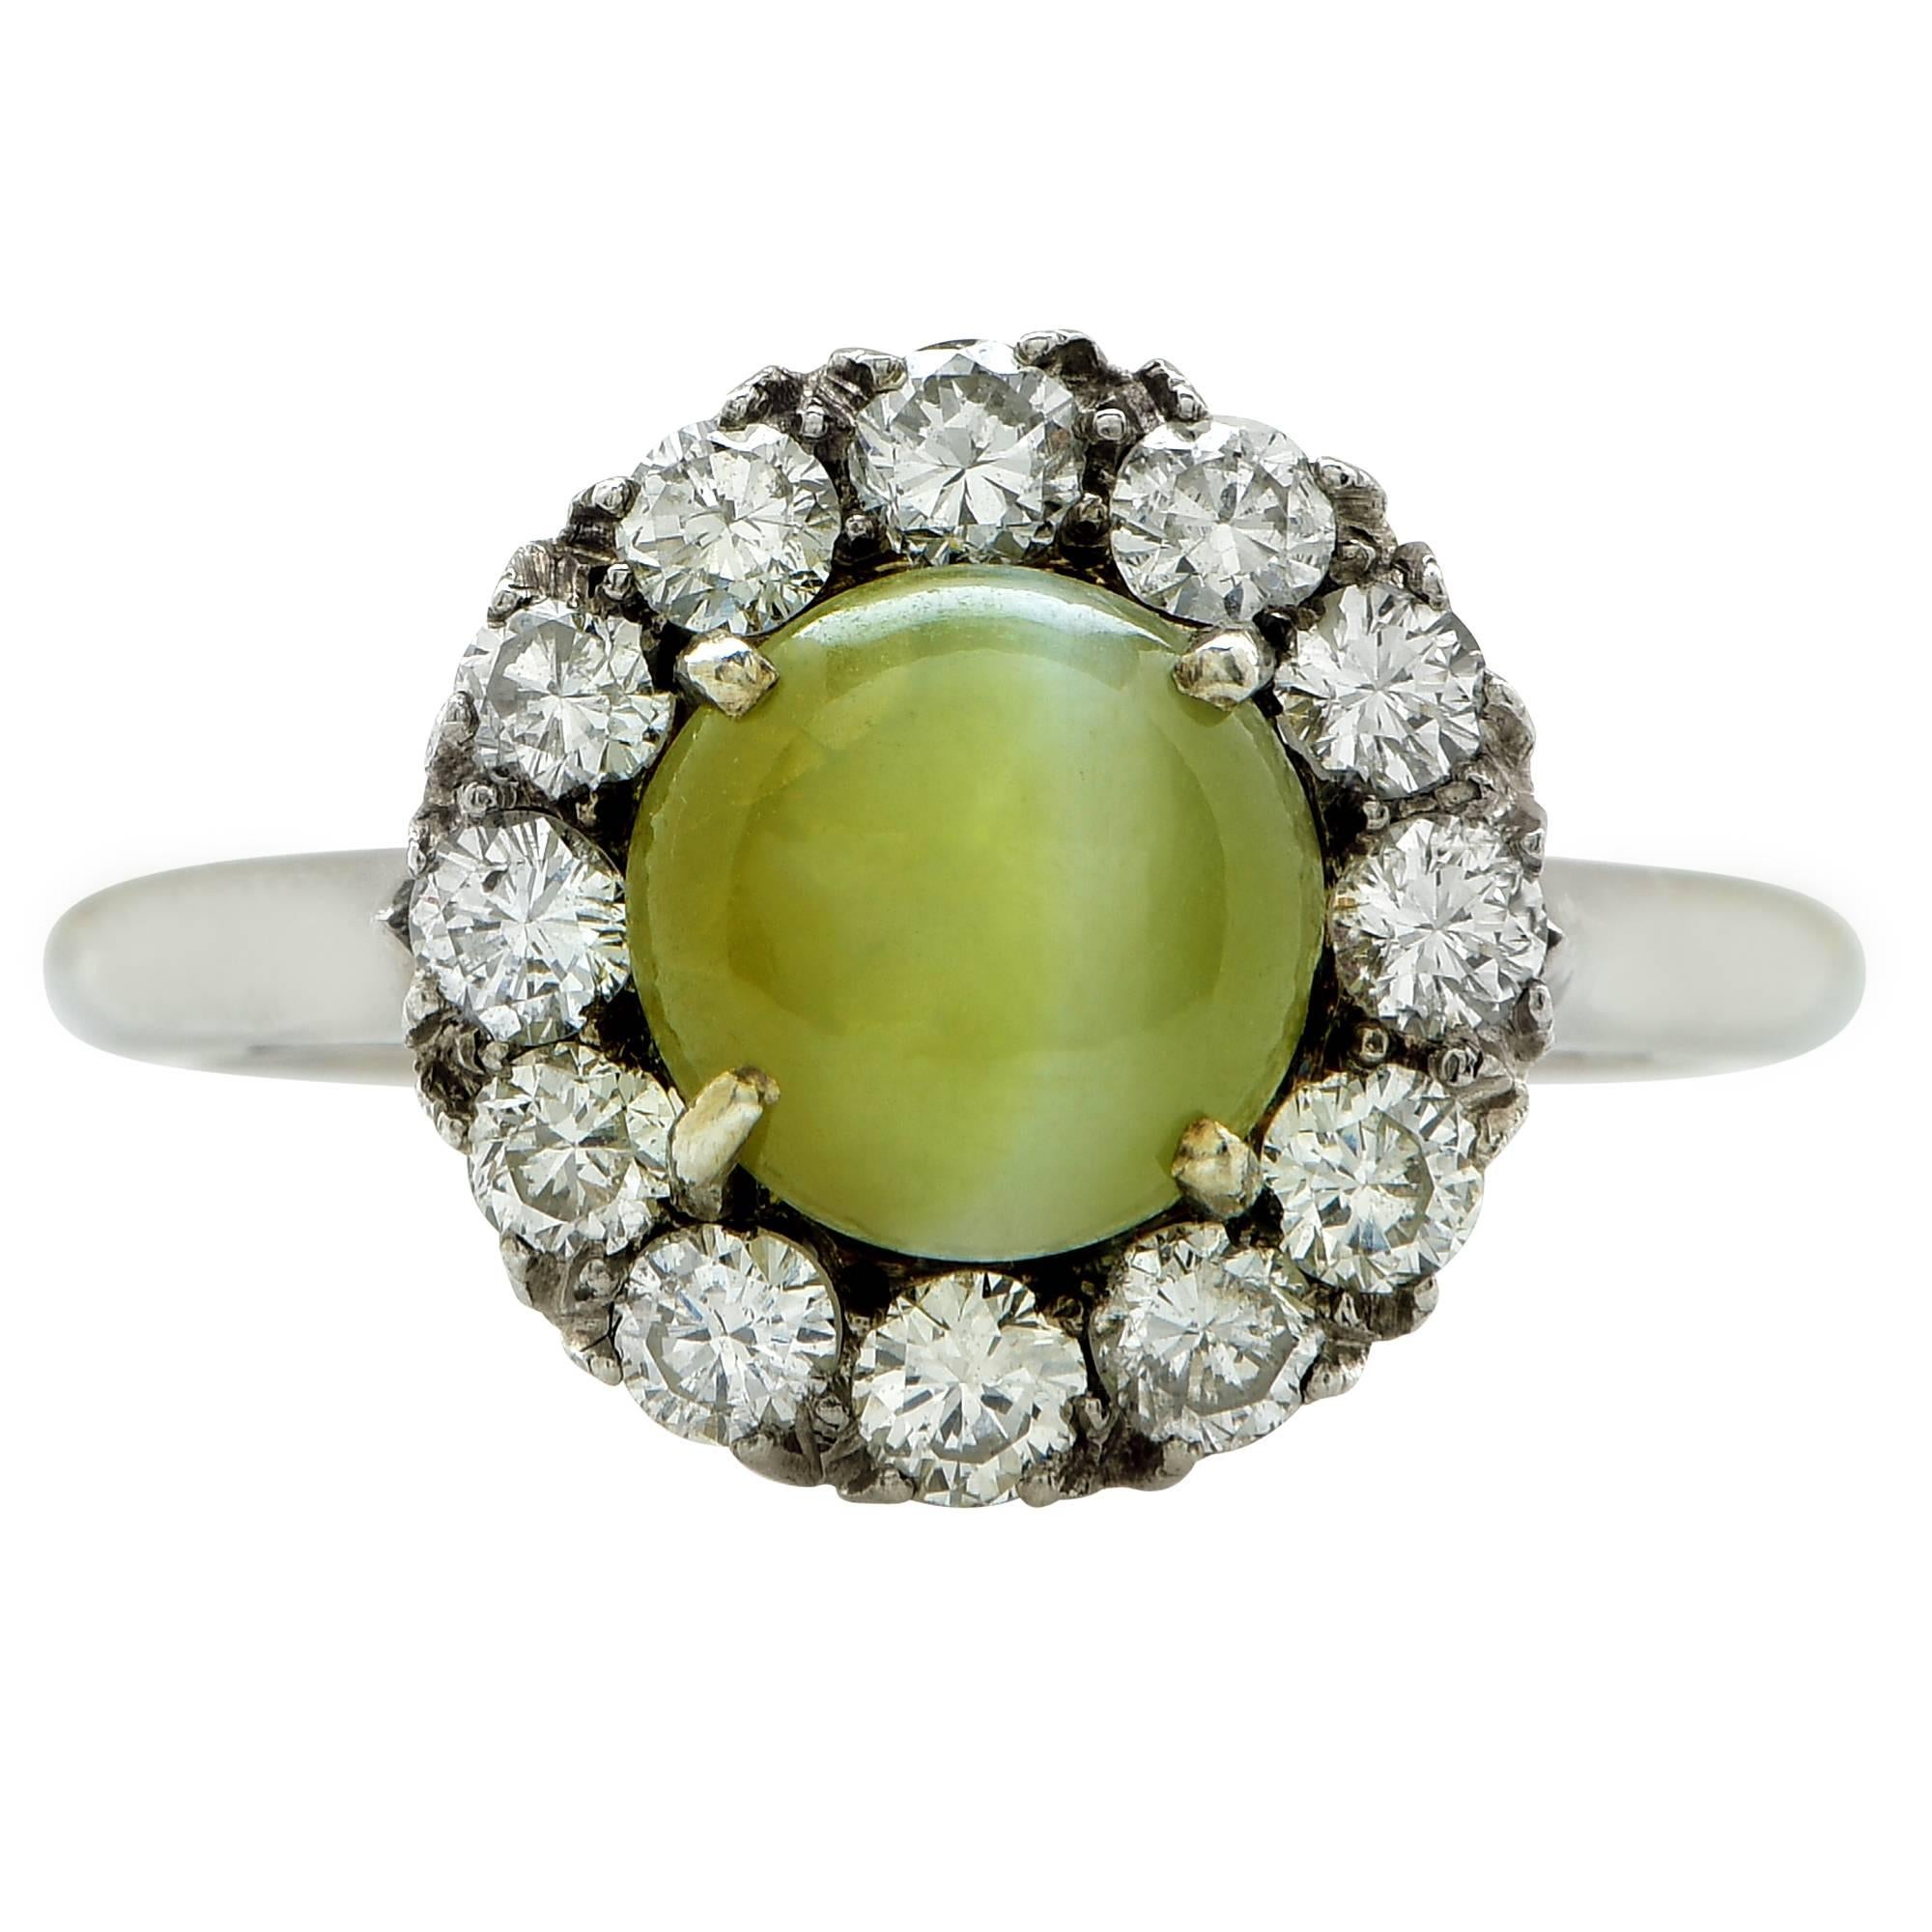 18k white gold ring featuring a cabochon cut cats-eye chrysoberyl weighing approximately 2.5cts total, accented by 12 round brilliant cut diamonds weighing approximately .70cts total G color VS clarity.

The ring is a size 5.75 and can be sized up